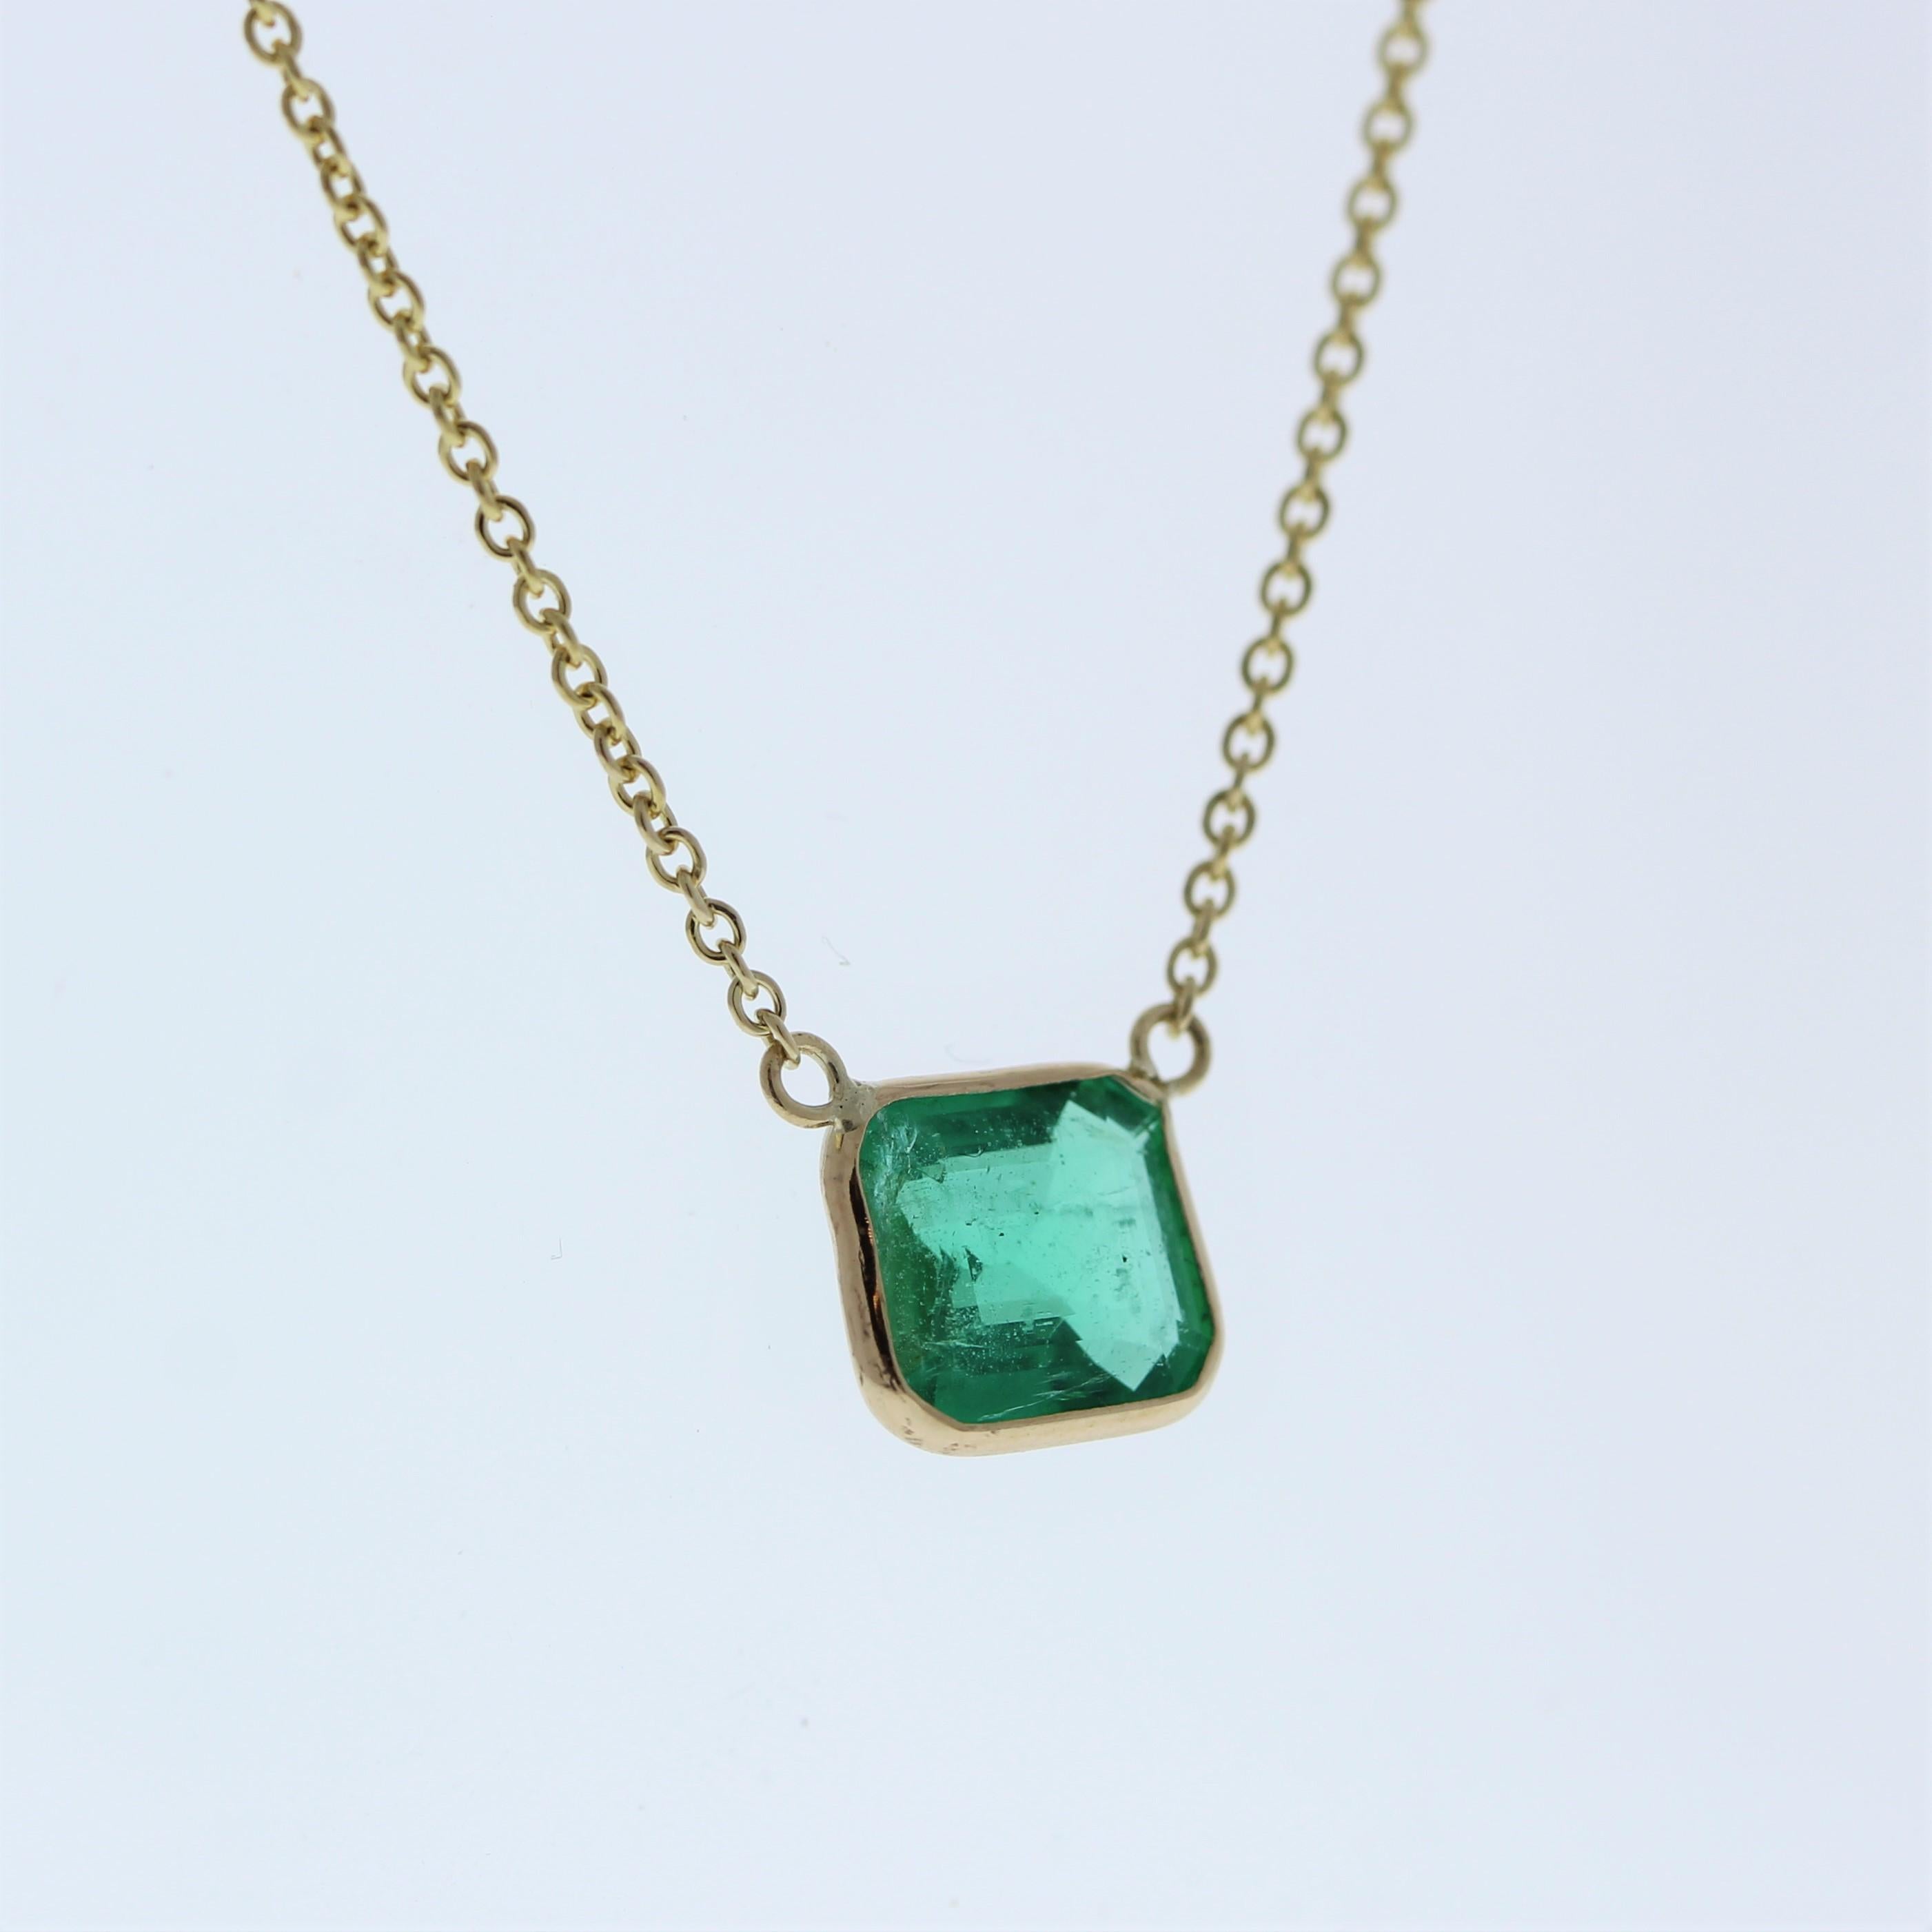 The necklace features a 1.57-carat Asscher-cut emerald set in a 14 karat yellow gold pendant or setting. The Asscher cut and the rich green color of the emerald against the yellow gold setting are likely to create an elegant and eye-catching fashion